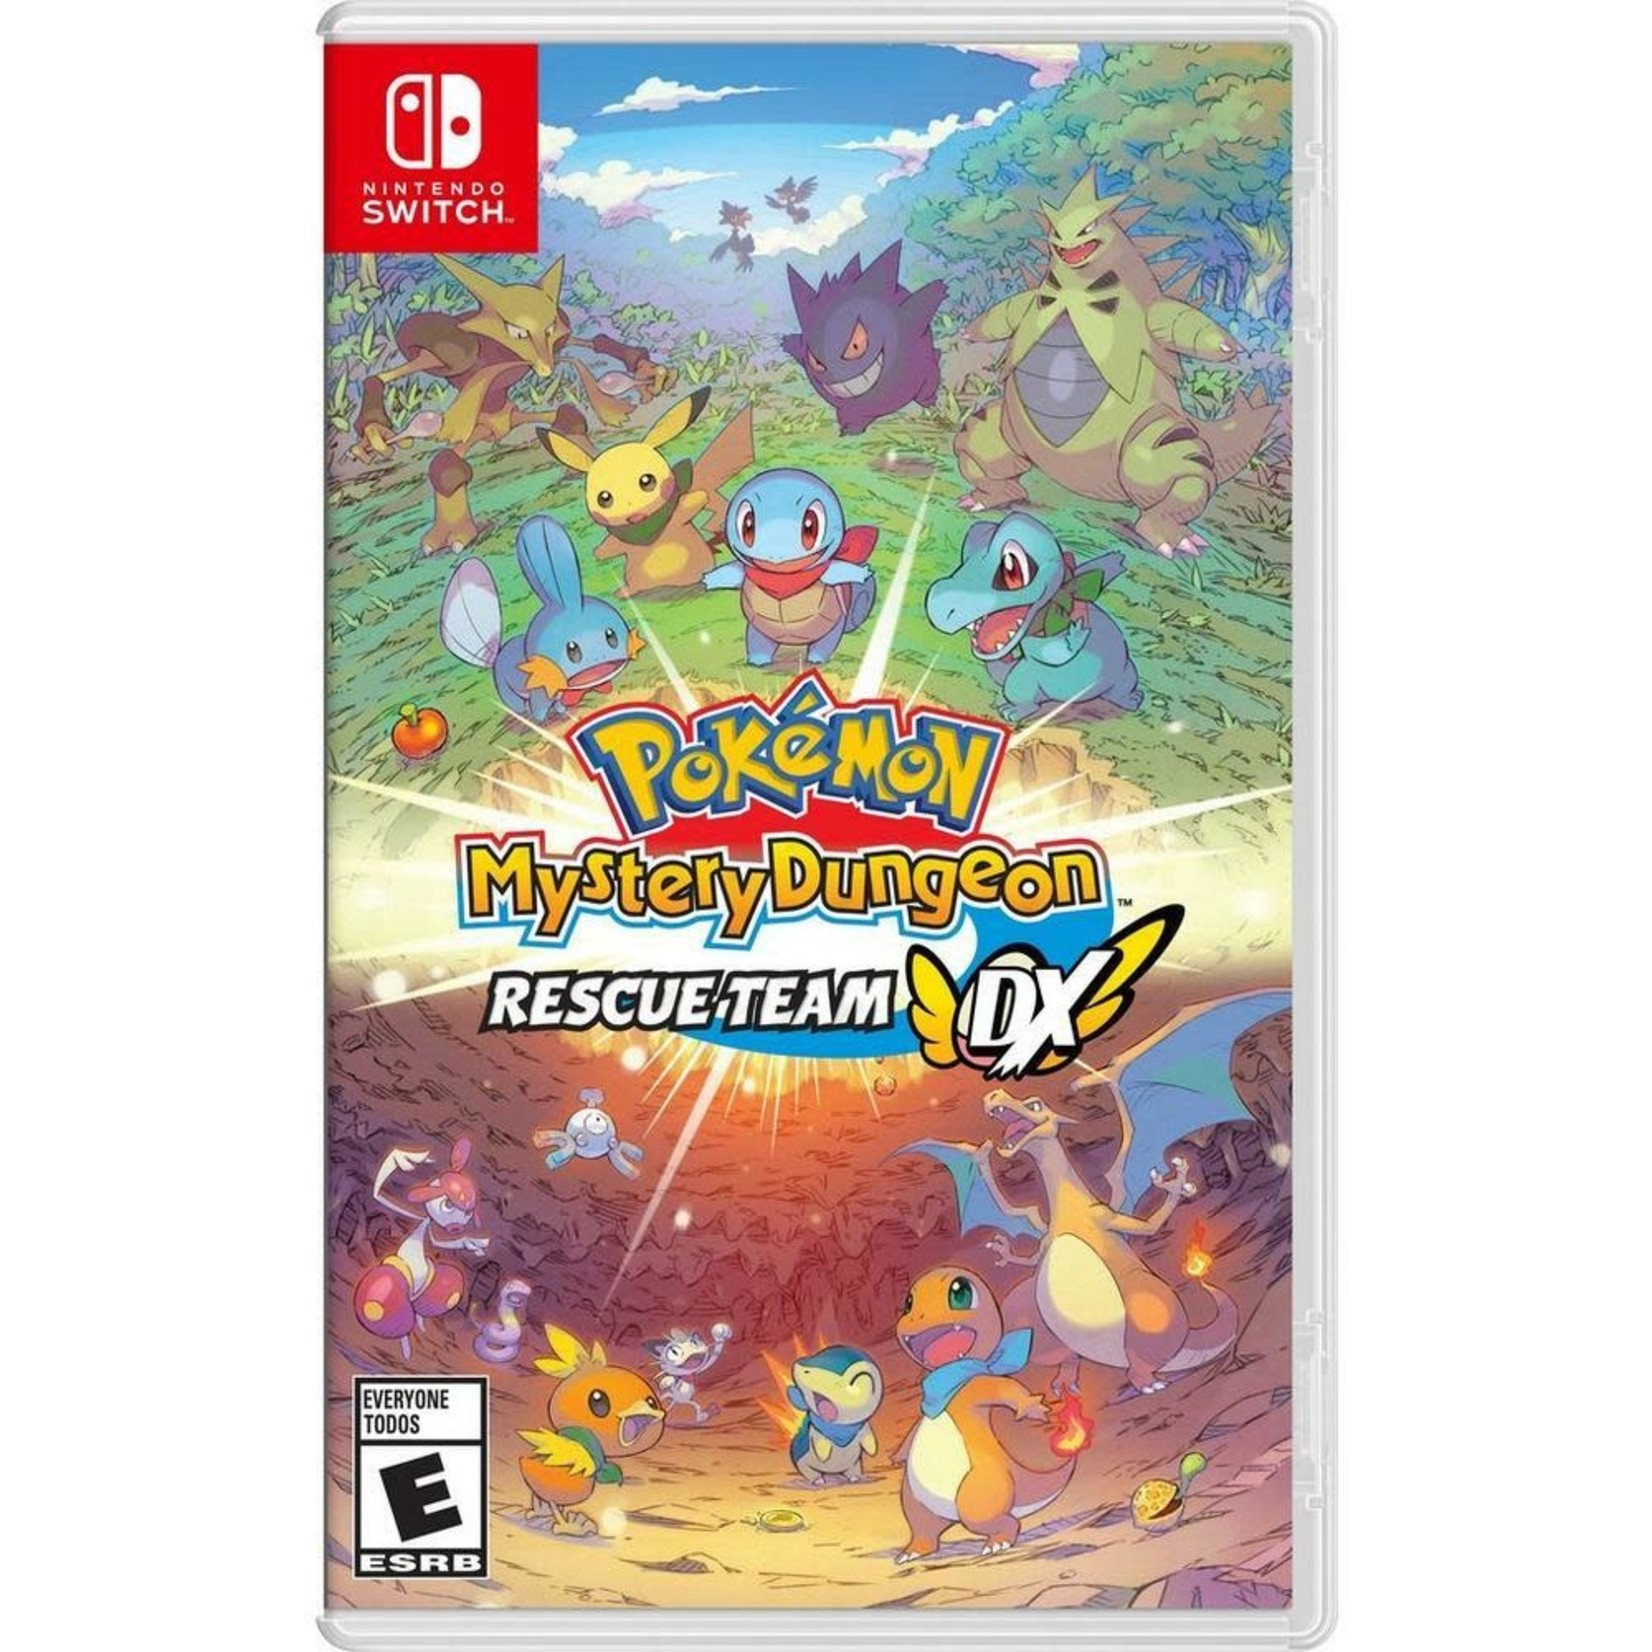 Switchu-Pokemon Mystery Dungeon: Rescue Team DX